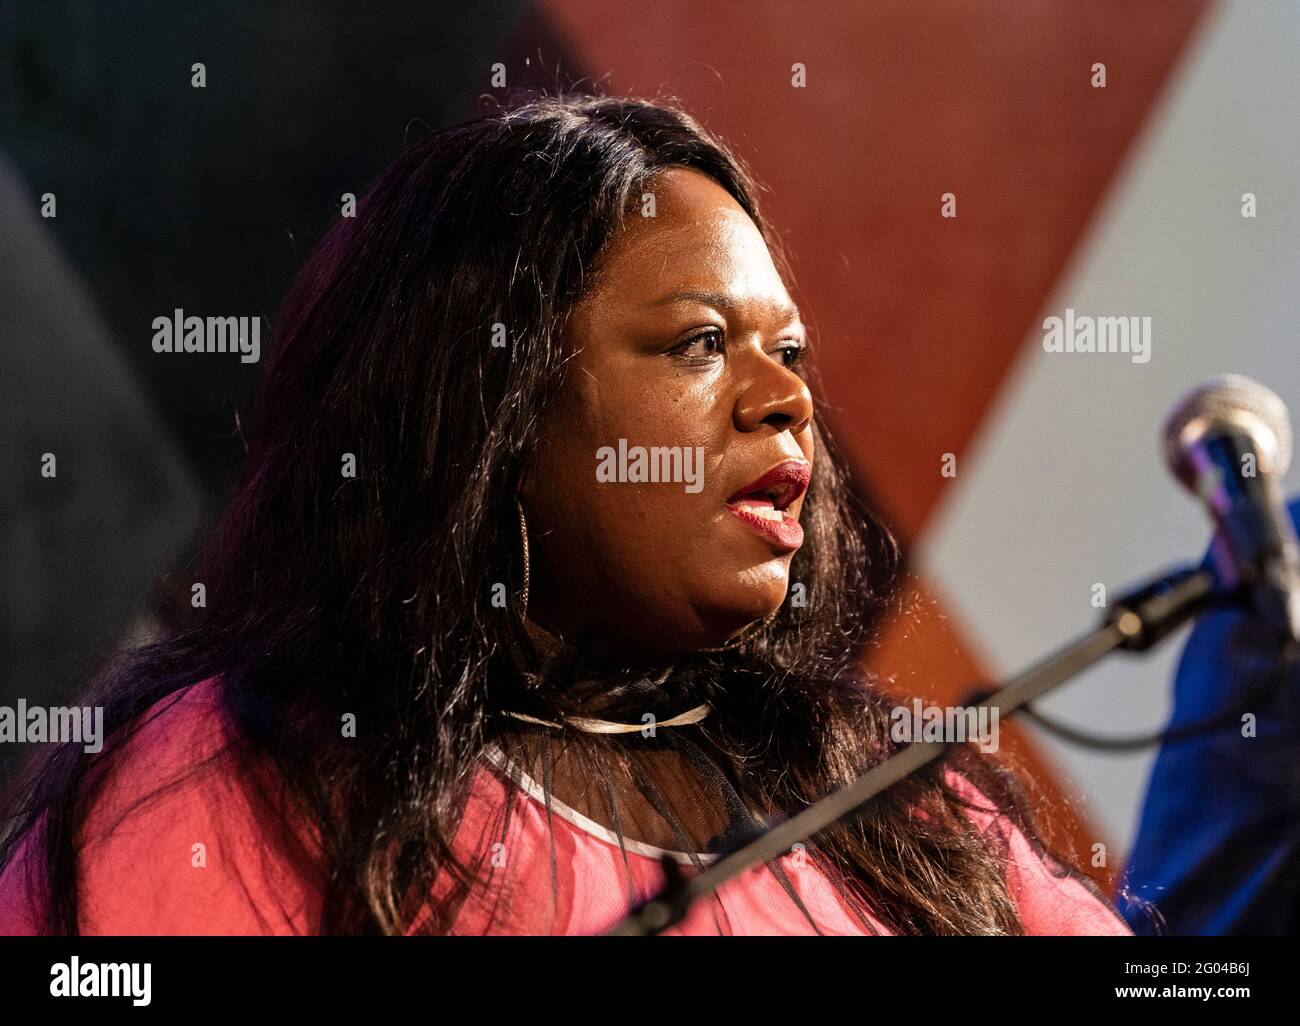 New York, NY - May 31, 2021: Comedian Yamaneika Saunders speaks at Carolines on Broadway comedy club re-opening after pandemic ceremony Stock Photo